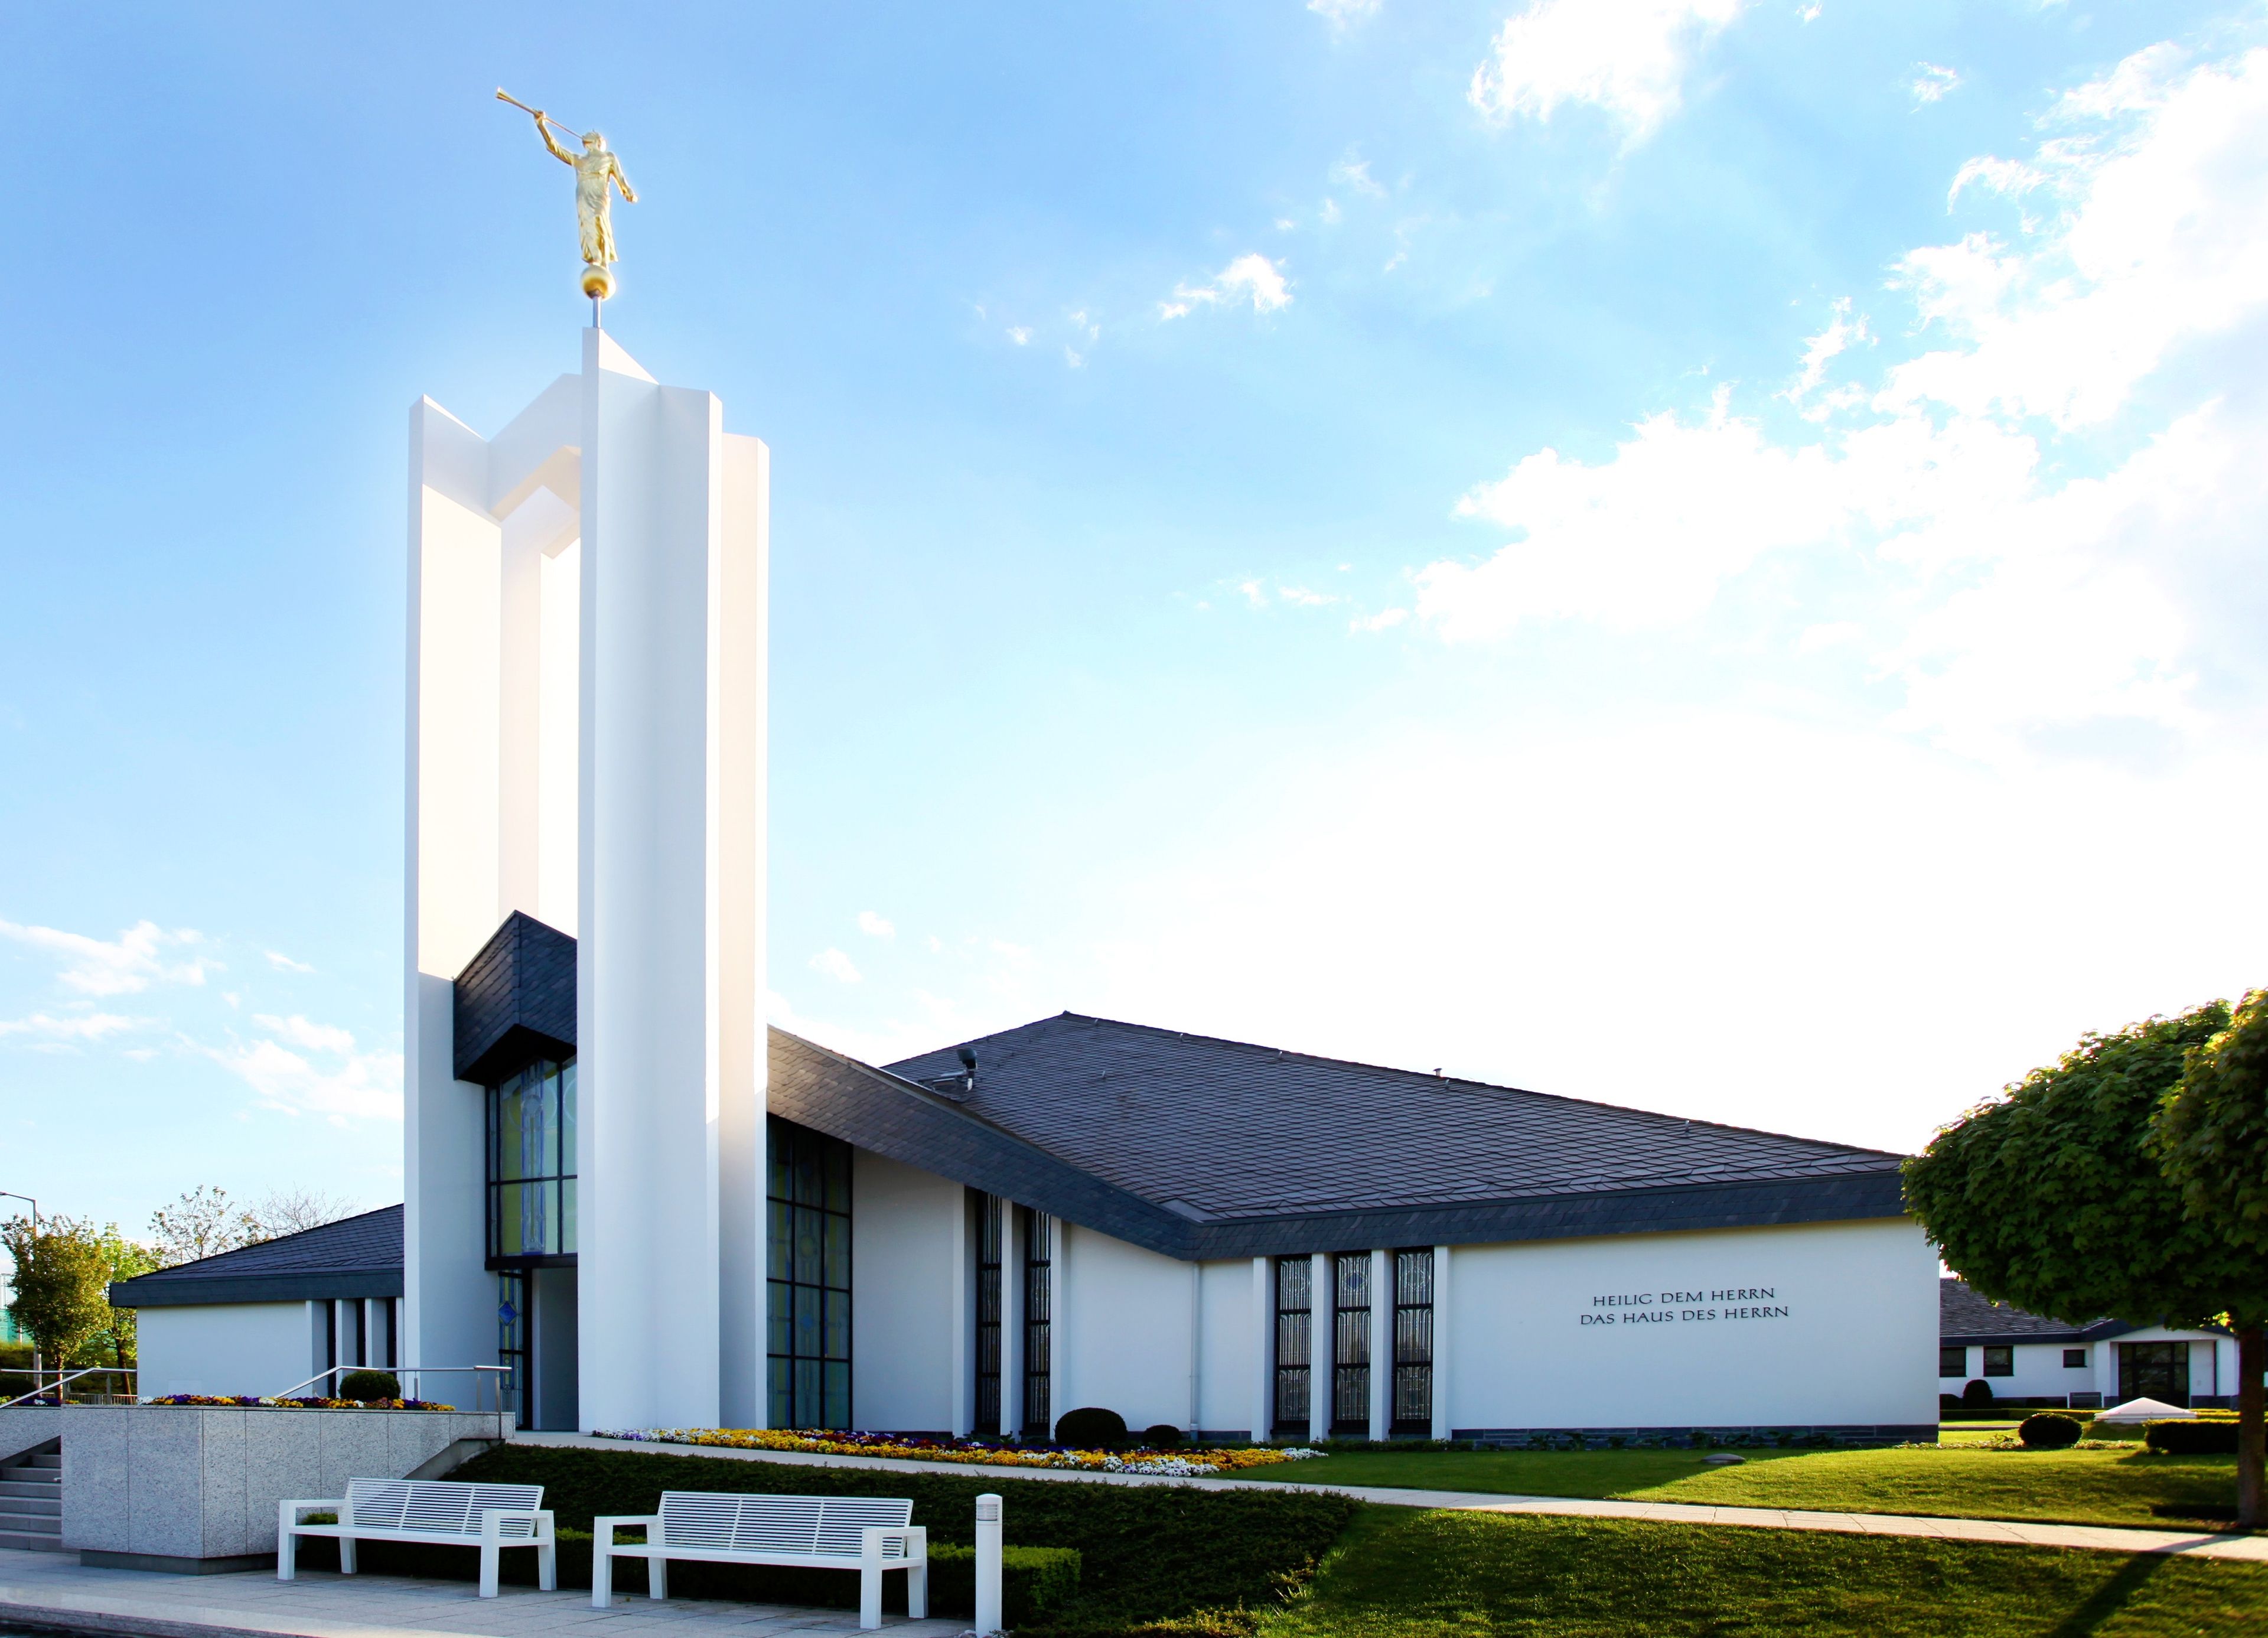 A side view of the Freiberg Germany Temple.